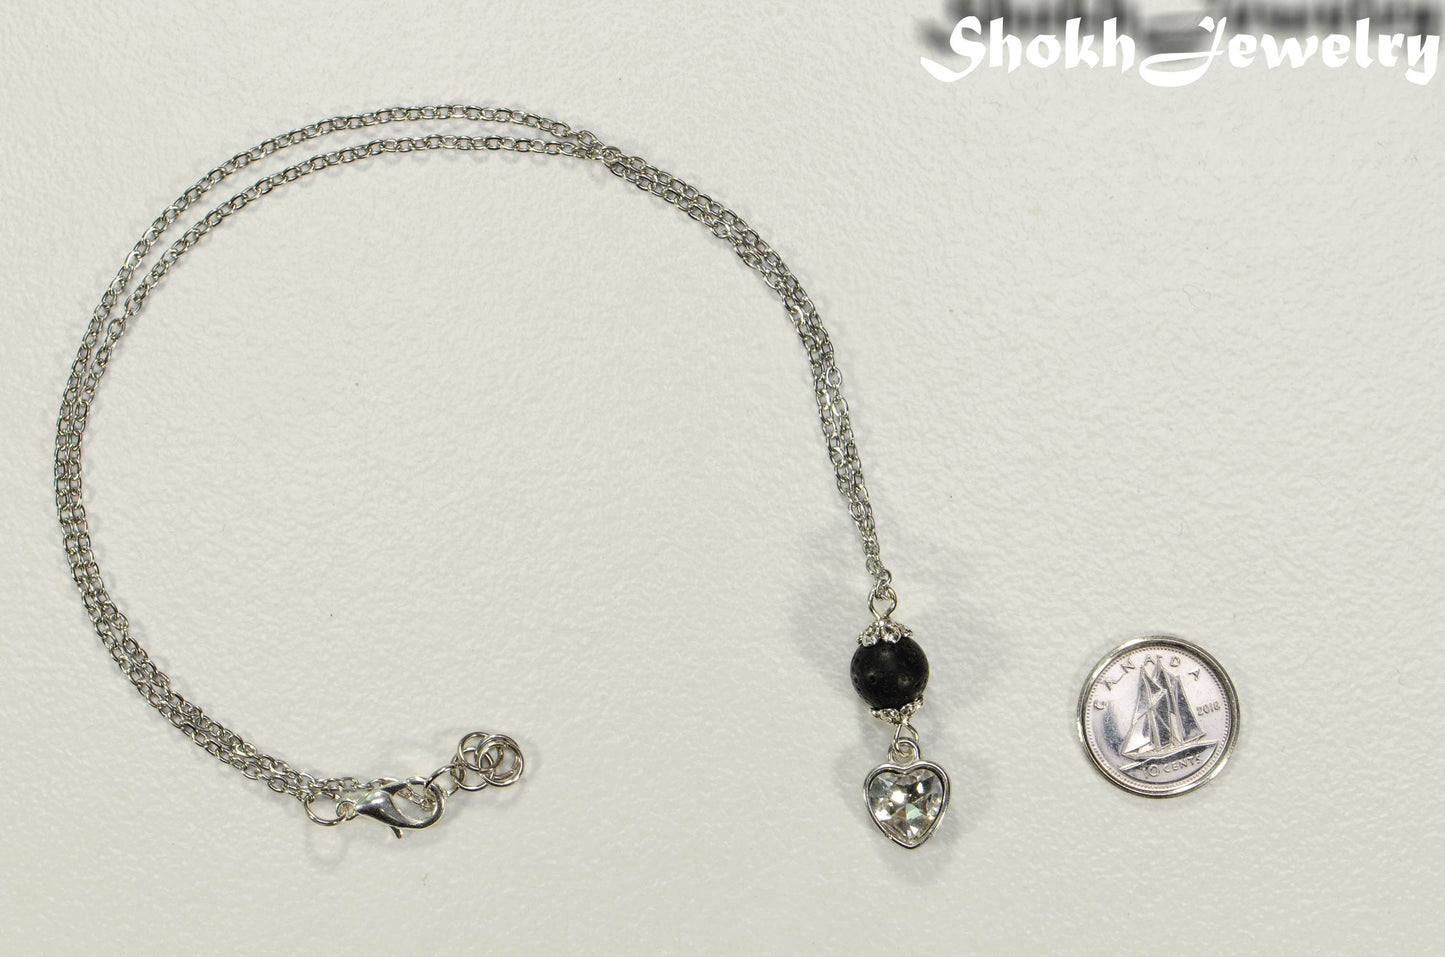 Lava Rock and Heart Shaped April Birthstone Choker Necklace beside a dime.